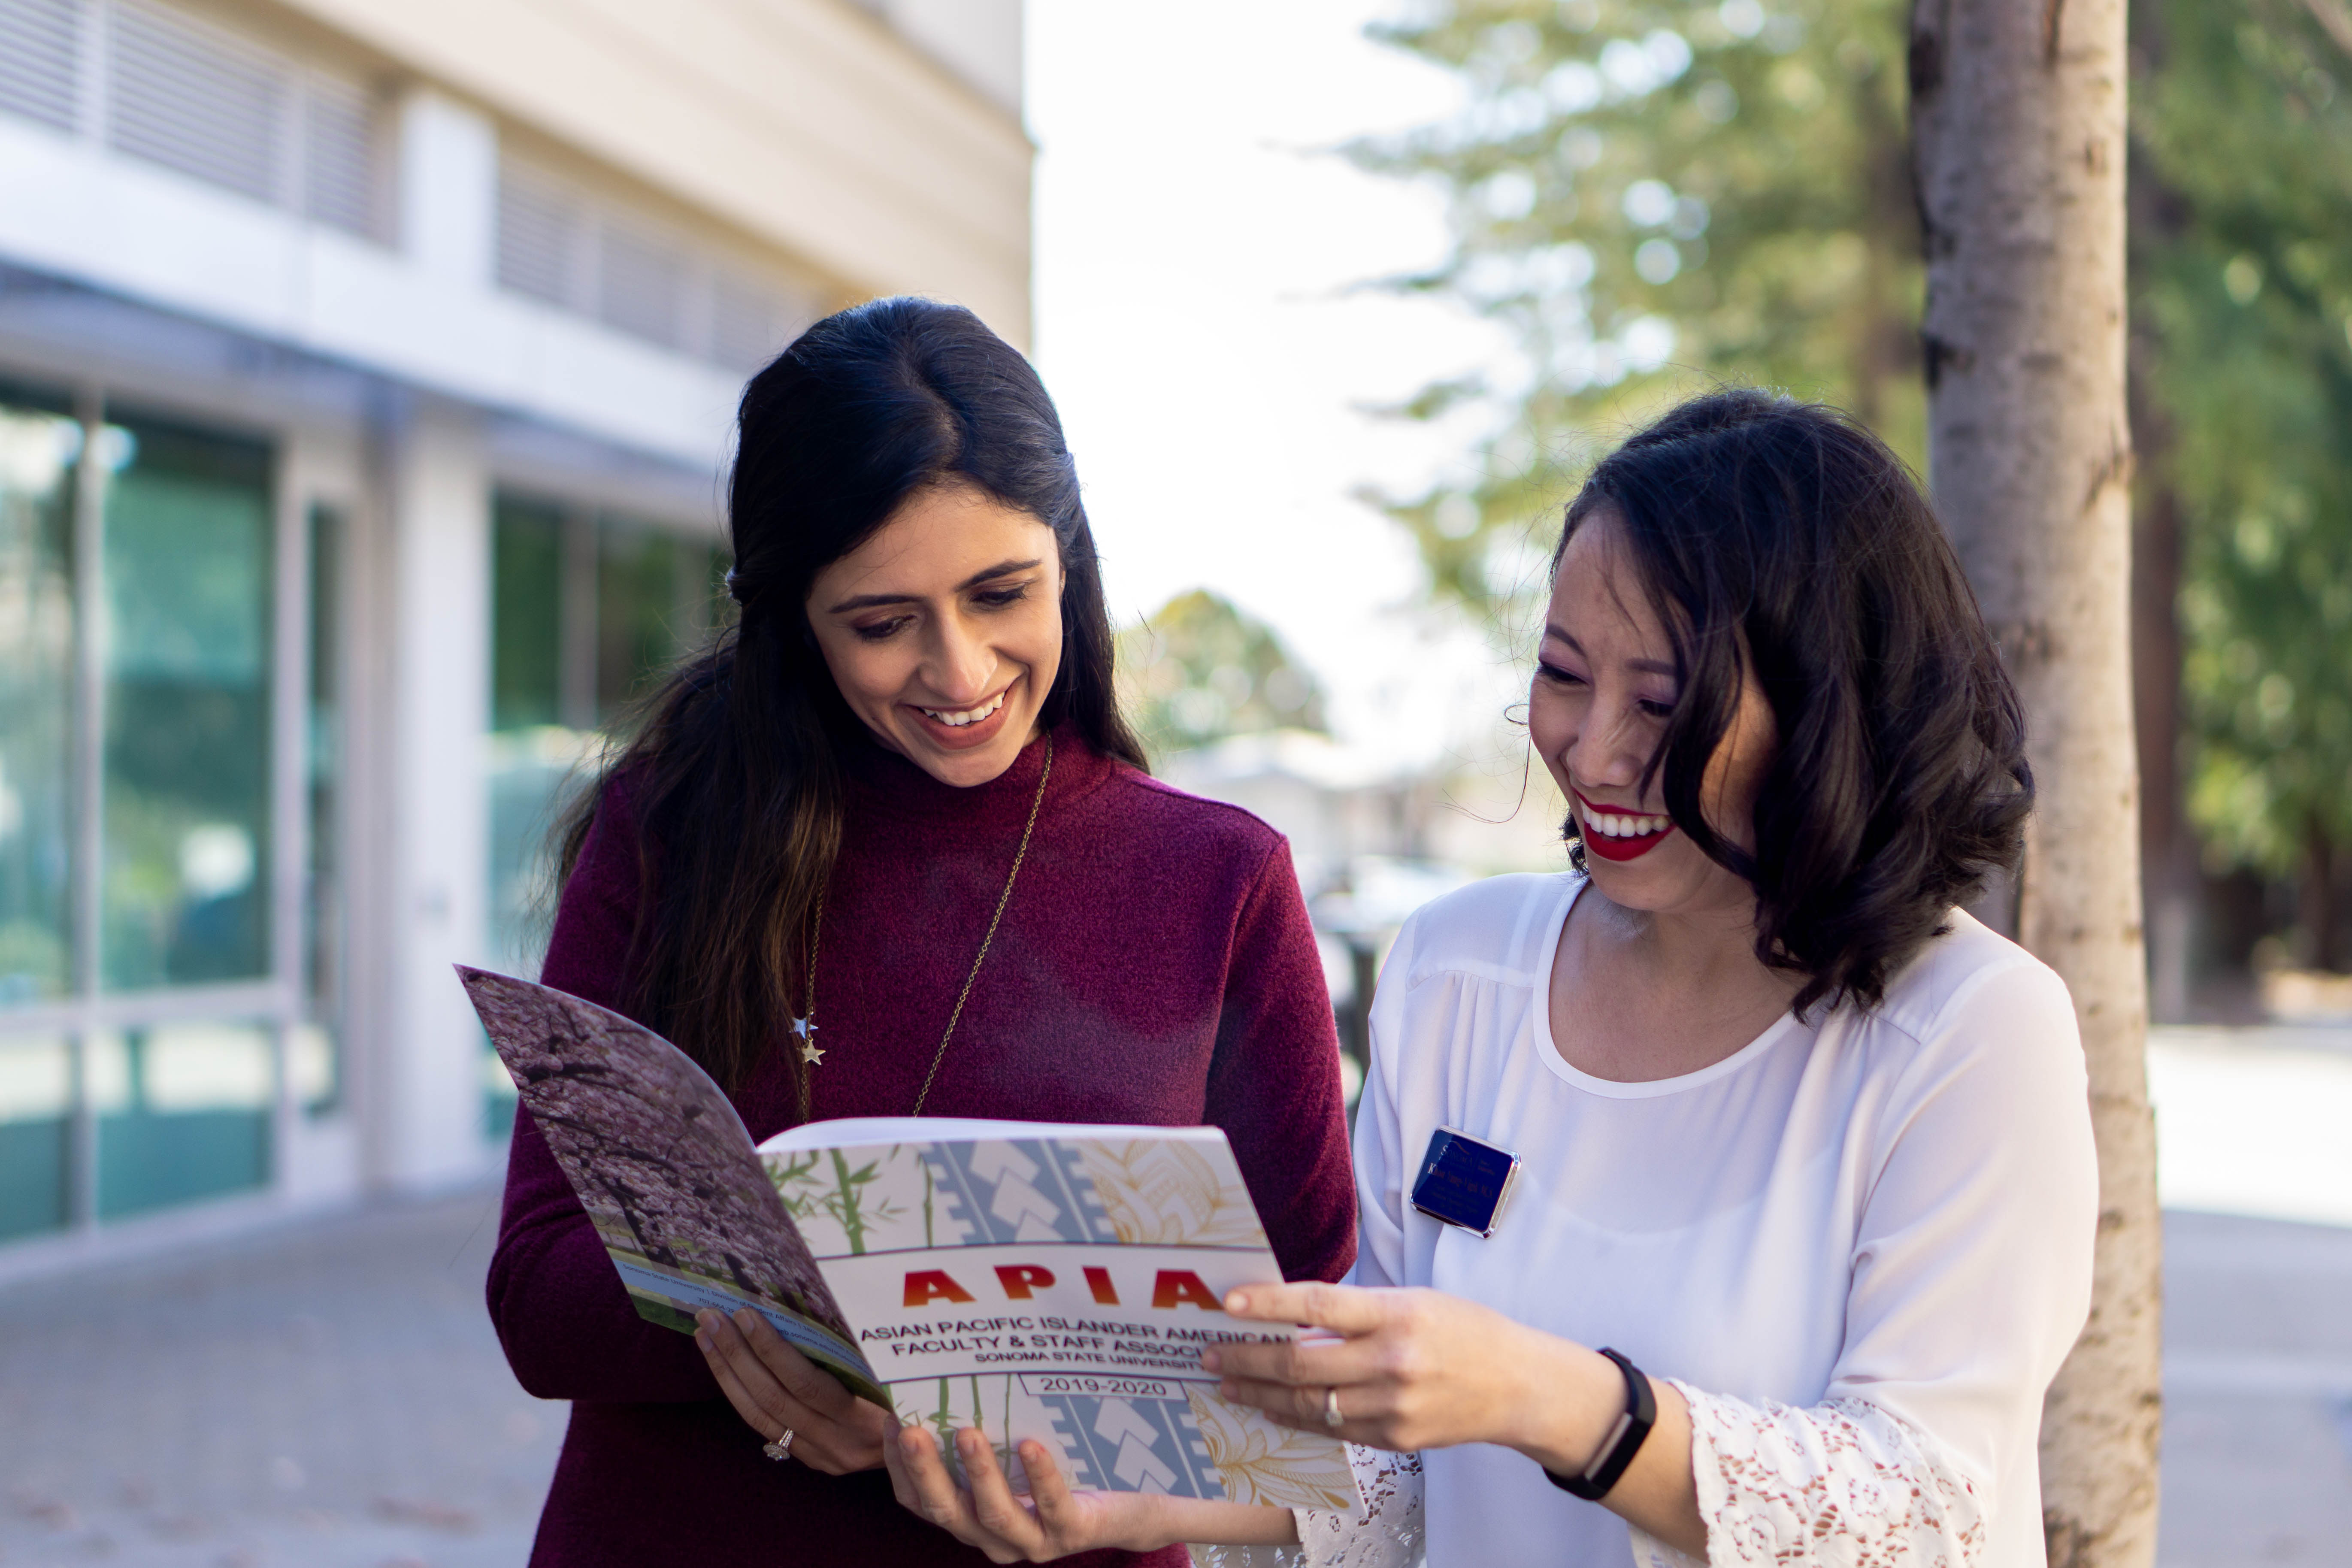 Two people sharing a magazine 